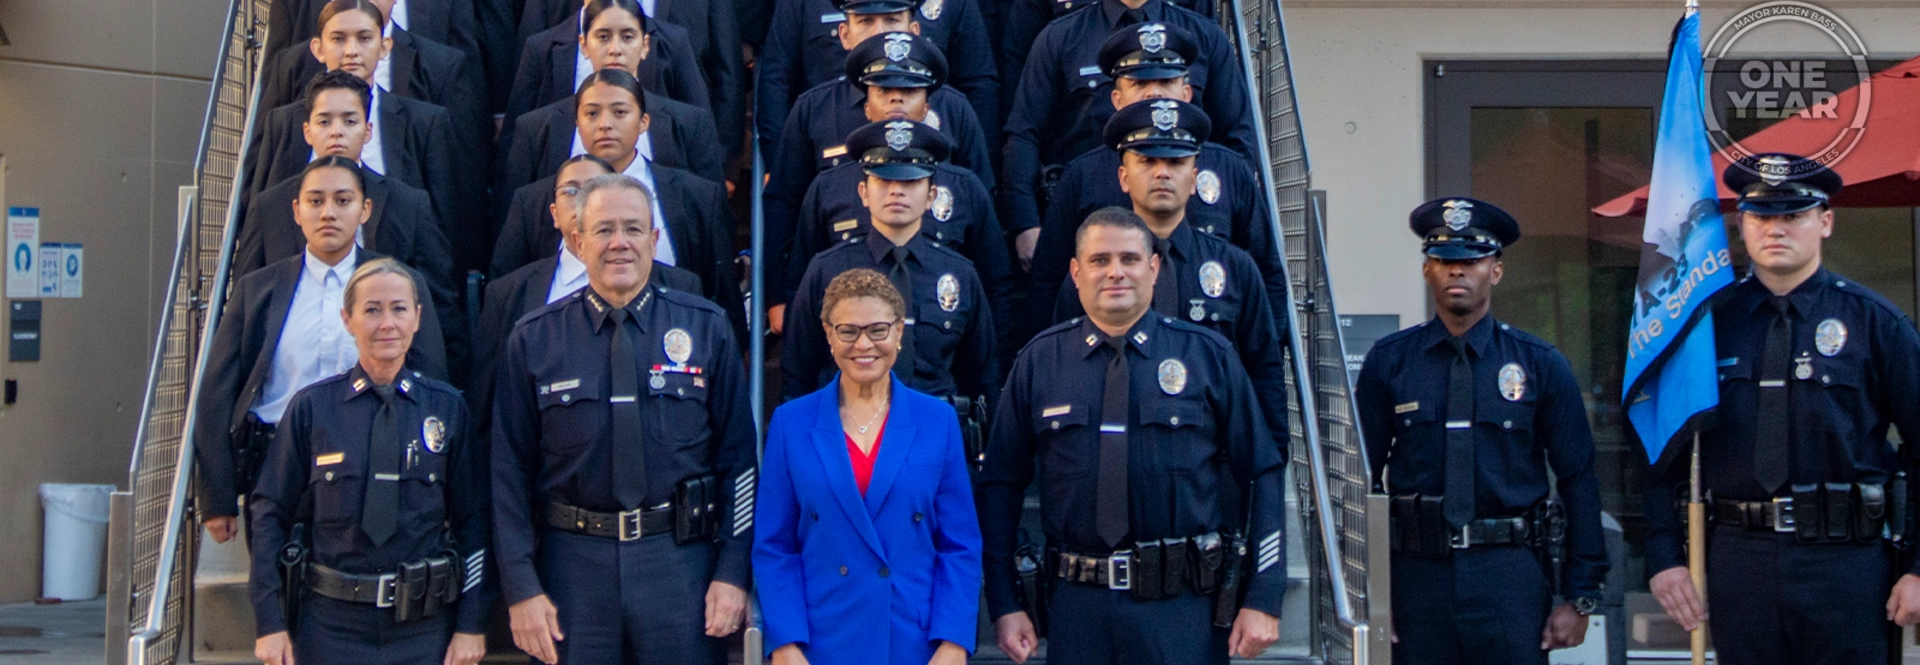 Mayor Bass with LAPD recruits